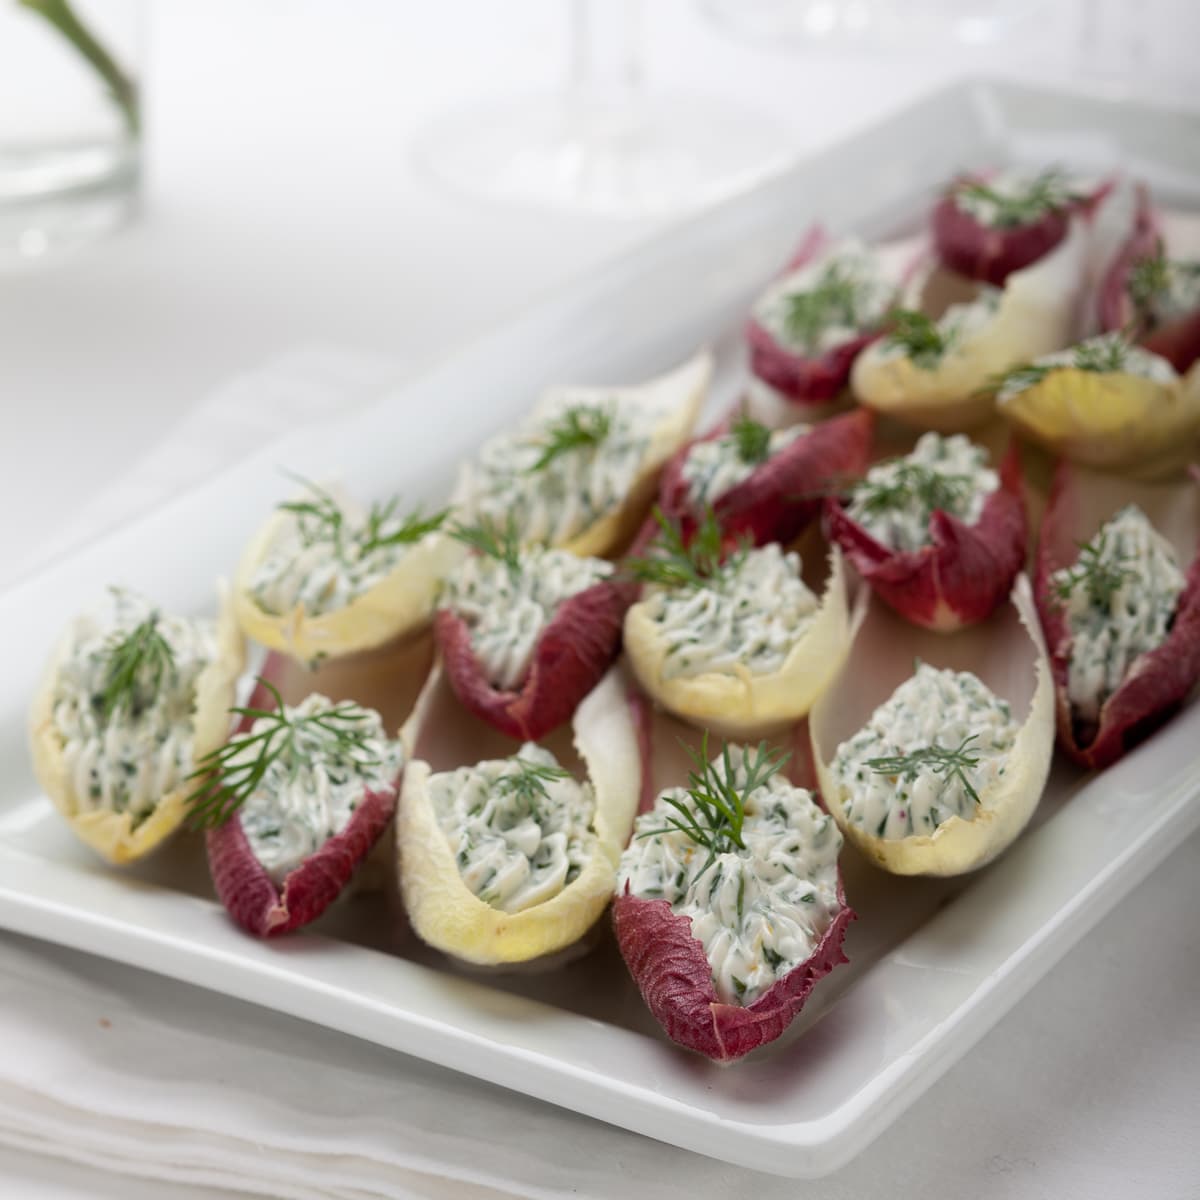 Endive leaves stuffed with herbed cream cheese.